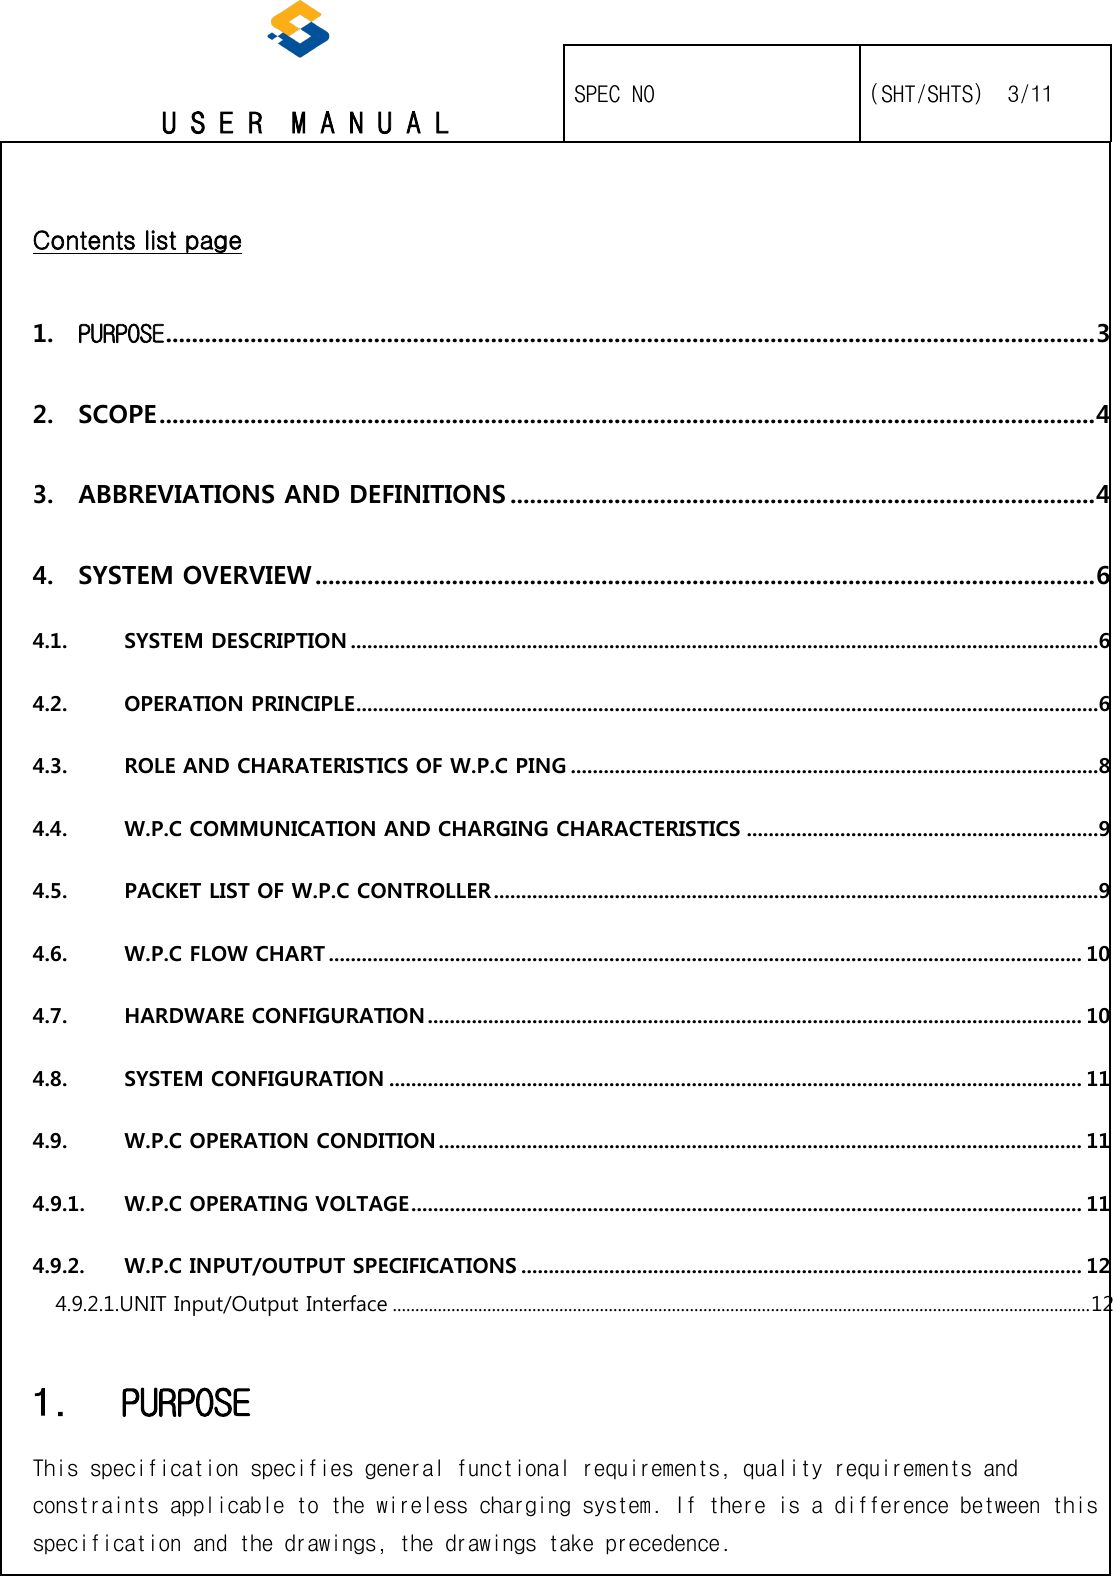   U S E R  M A N U A L    SPEC NO   (SHT/SHTS)  3/11                                                                                                                                                  Contents list page 1. PURPOSE ............................................................................................................................................... 3 2. SCOPE ................................................................................................................................................ 4 3. ABBREVIATIONS AND DEFINITIONS .......................................................................................... 4 4. SYSTEM OVERVIEW ........................................................................................................................ 6 4.1. SYSTEM DESCRIPTION ........................................................................................................................................6 4.2. OPERATION PRINCIPLE .......................................................................................................................................6 4.3. ROLE AND CHARATERISTICS OF W.P.C PING ................................................................................................8 4.4. W.P.C COMMUNICATION AND CHARGING CHARACTERISTICS ................................................................9 4.5. PACKET LIST OF W.P.C CONTROLLER ..............................................................................................................9 4.6. W.P.C FLOW CHART ......................................................................................................................................... 10 4.7. HARDWARE CONFIGURATION ....................................................................................................................... 10 4.8. SYSTEM CONFIGURATION .............................................................................................................................. 11 4.9. W.P.C OPERATION CONDITION ..................................................................................................................... 11 4.9.1. W.P.C OPERATING VOLTAGE .......................................................................................................................... 11 4.9.2. W.P.C INPUT/OUTPUT SPECIFICATIONS ...................................................................................................... 12 4.9.2.1.UNIT Input/Output Interface ........................................................................................................................................................... 12 1. PURPOSE This specification specifies general functional requirements, quality requirements and constraints applicable to the wireless charging system. If there is a difference between this specification and the drawings, the drawings take precedence. 